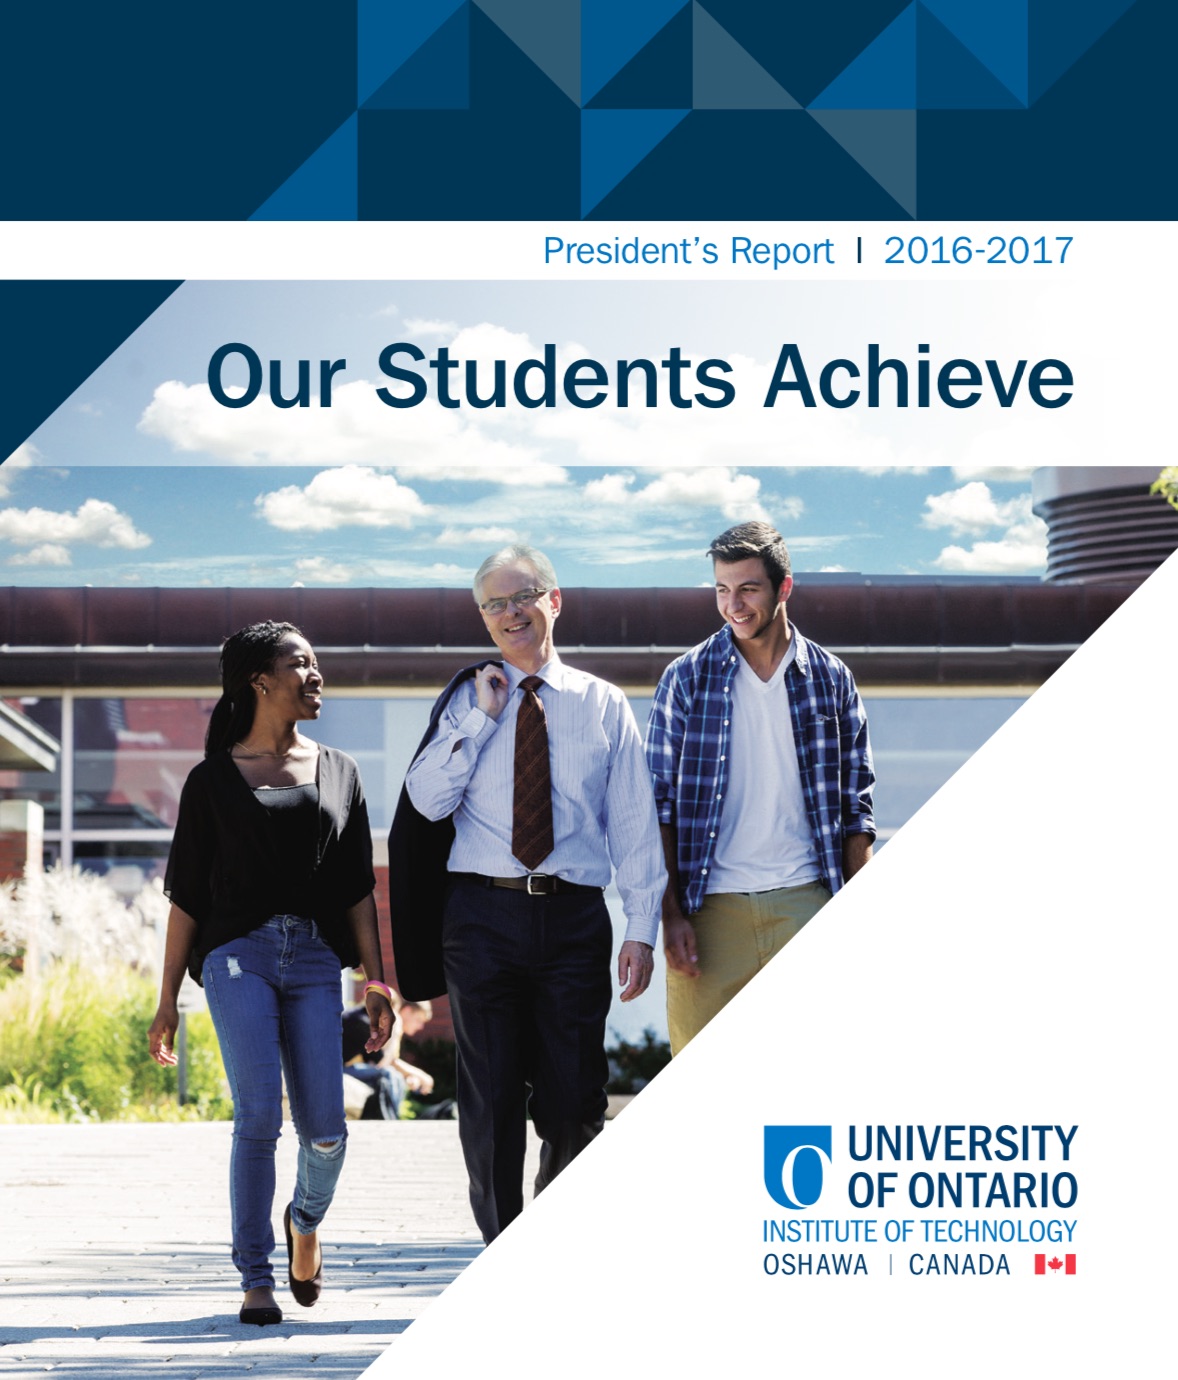 The cover of the President's Report 2016-2017: Our Students Achieve